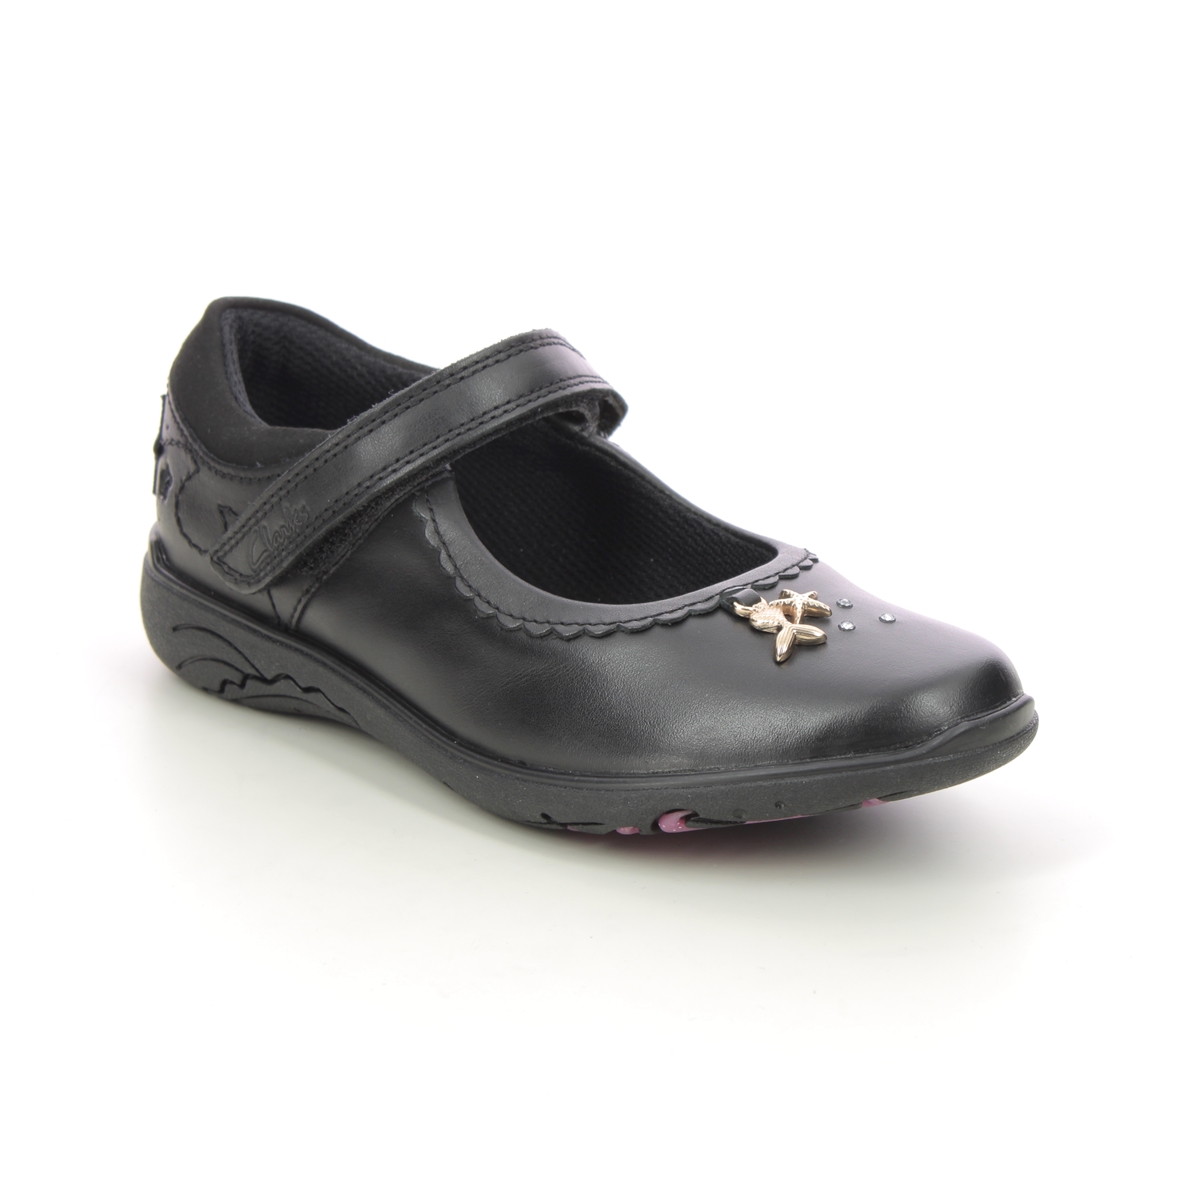 Clarks Relda Sea K Mary Jane Black Leather Kids Girls School Shoes 722407G In Size 13 In Plain Black Leather G Width Fitting For School For kids